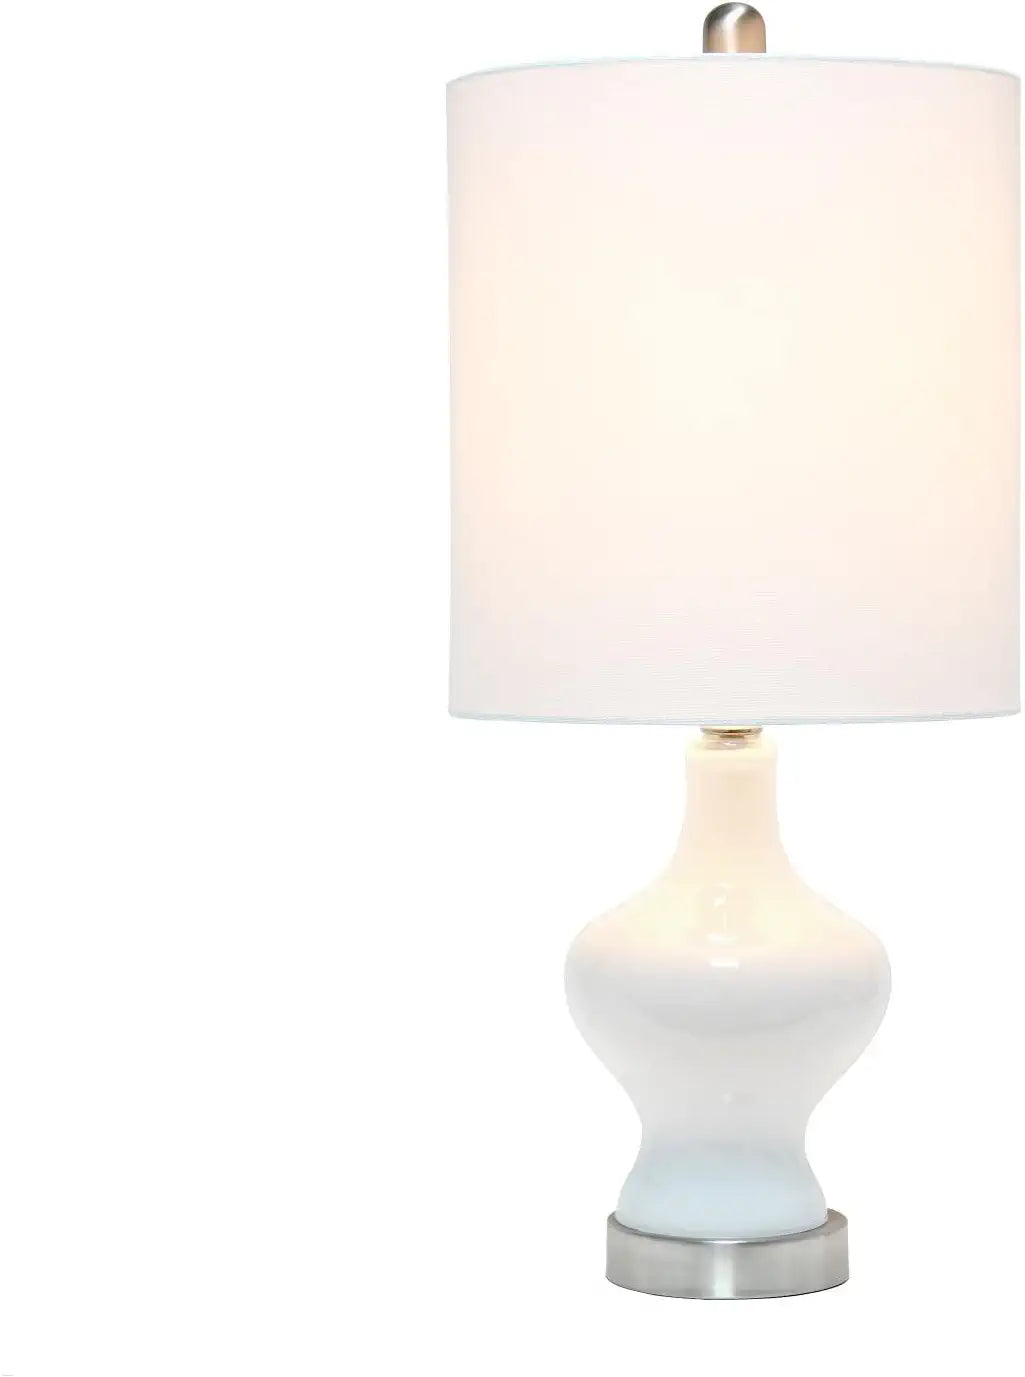 Lalia Home Contemporary Paseo Table Lamp with White Fabric Shade - White